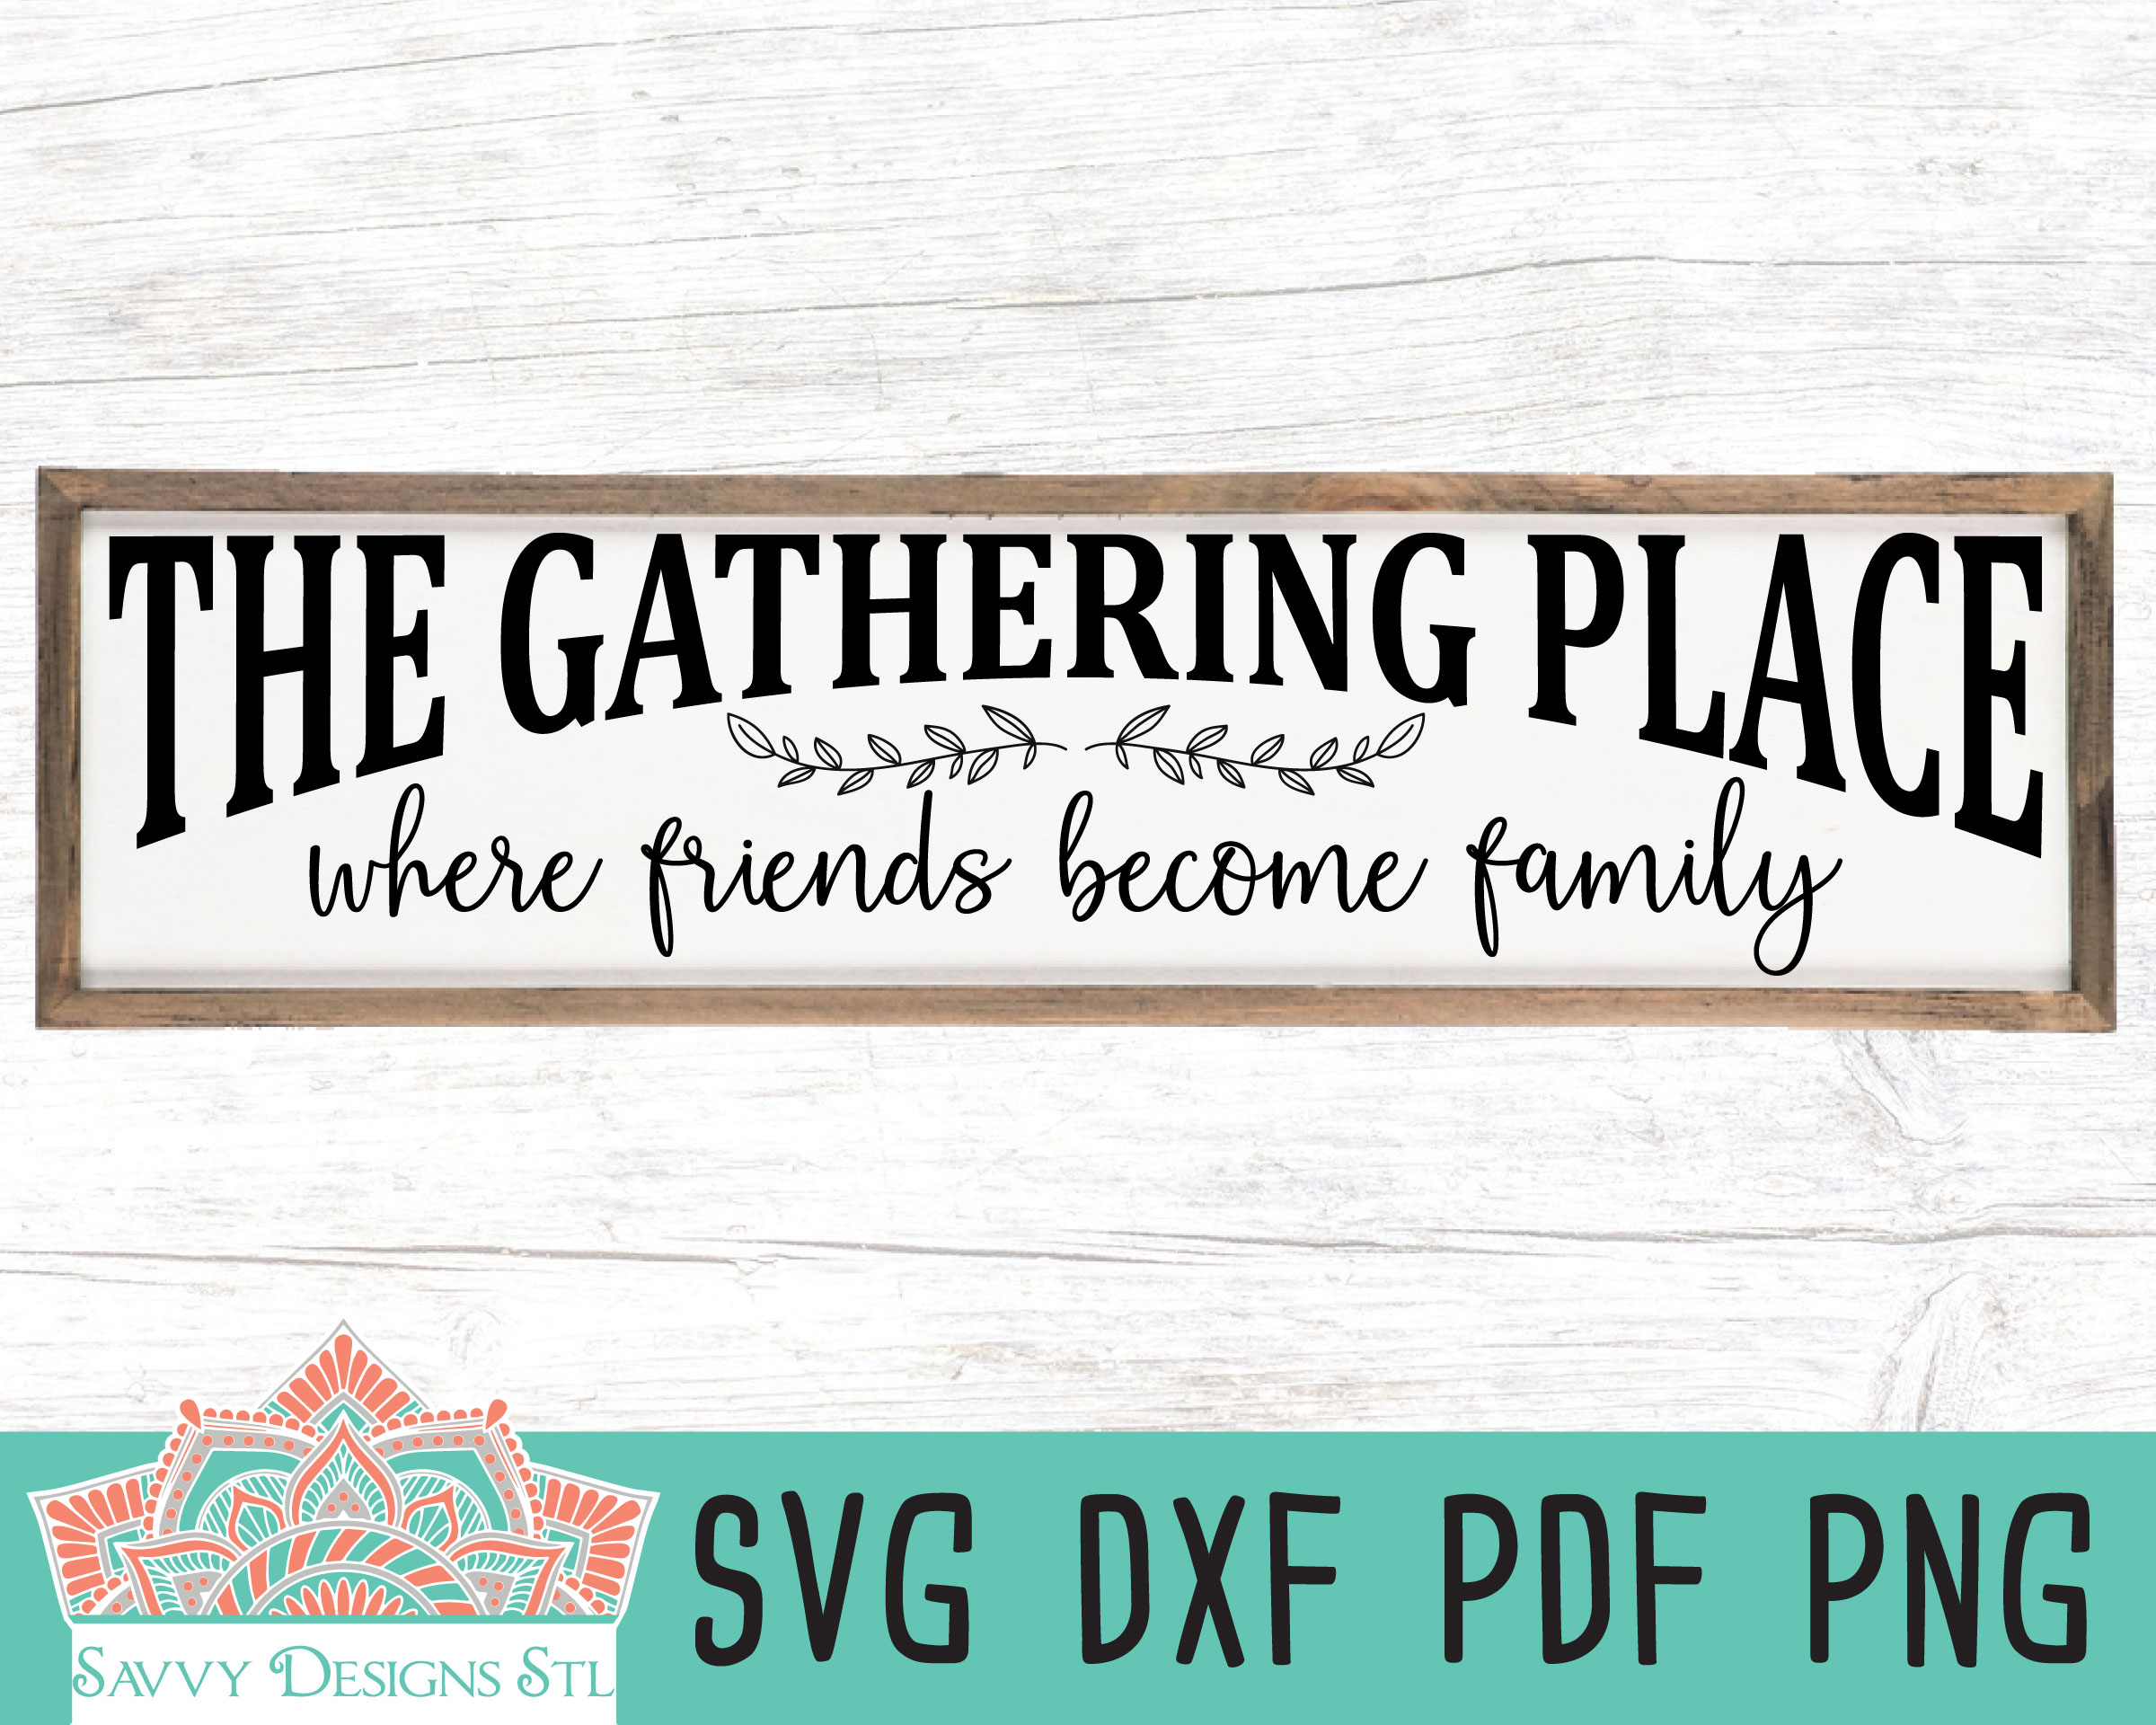 Download The Gathering Place Where Friends Become Family Cut File Savvy Designs Stl